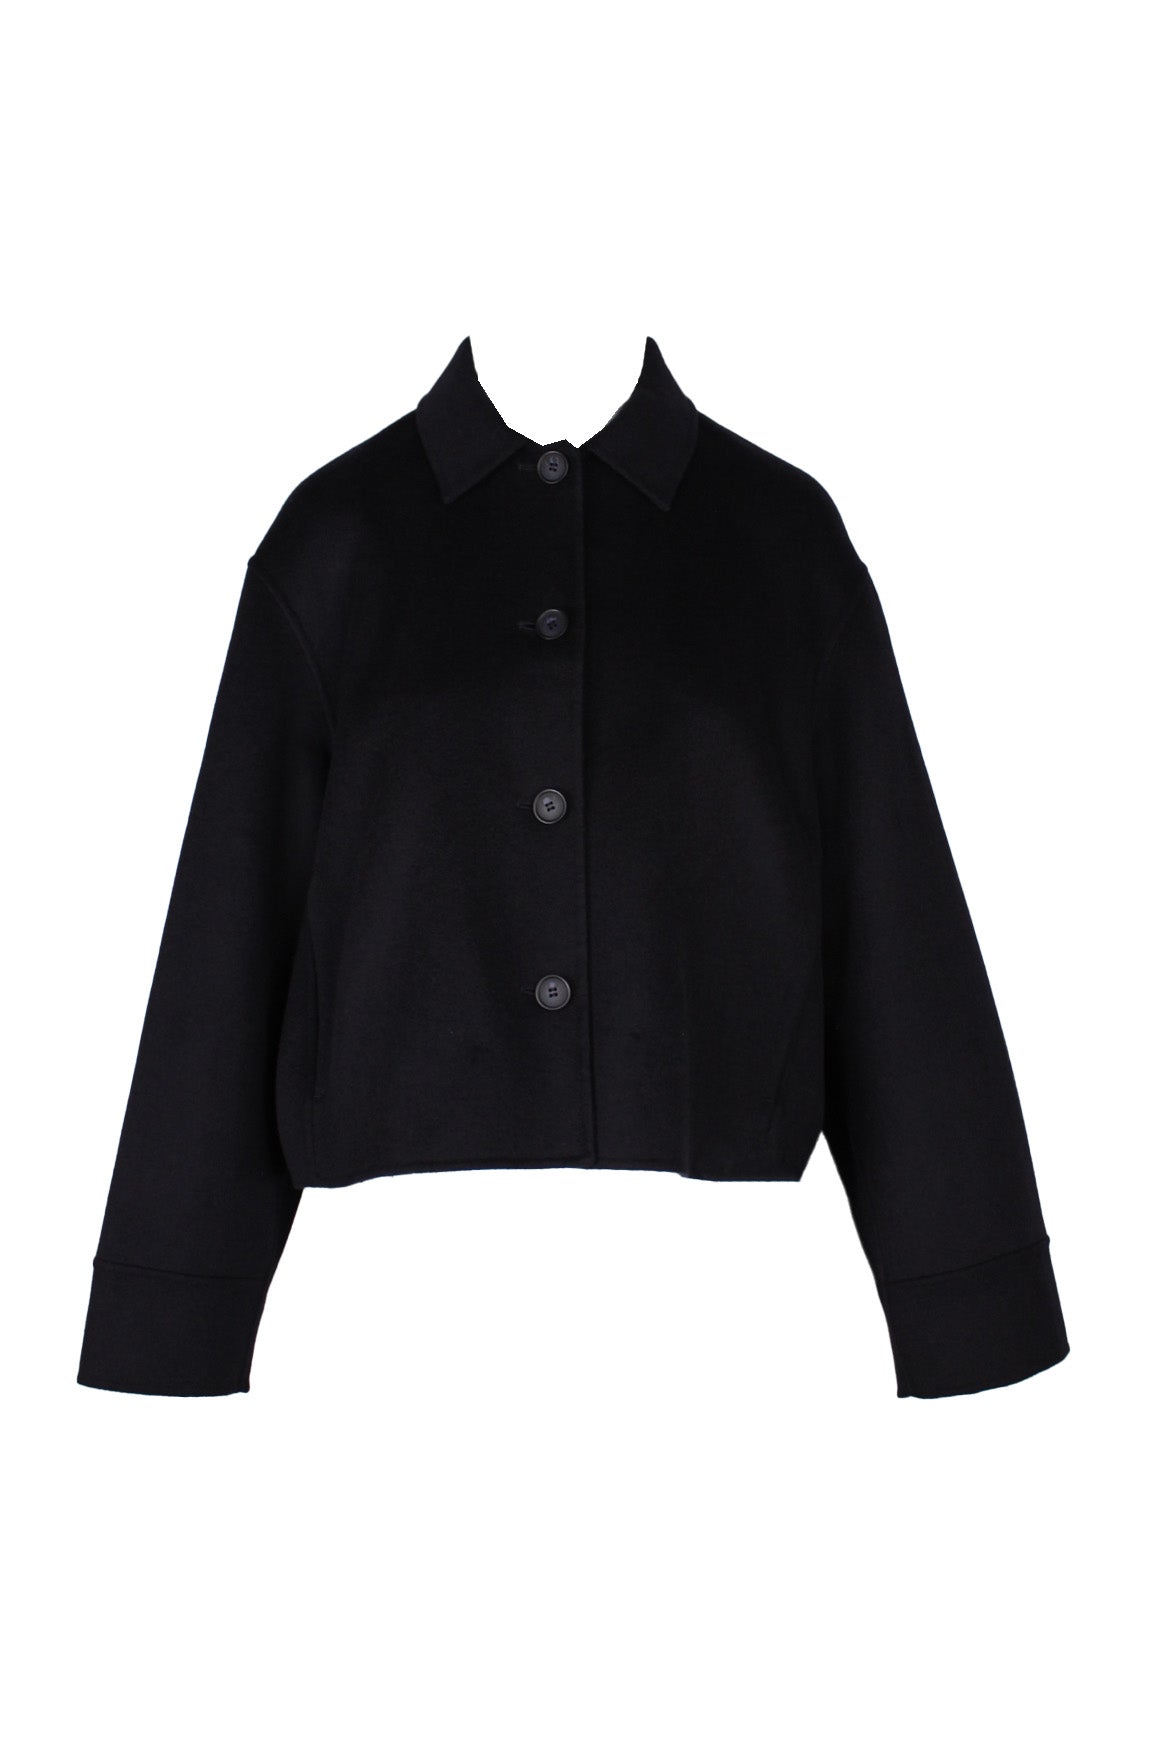 front of cos black wool blend short jacket. features spread collar, side seam pockets, long sleeves, and button closure. 